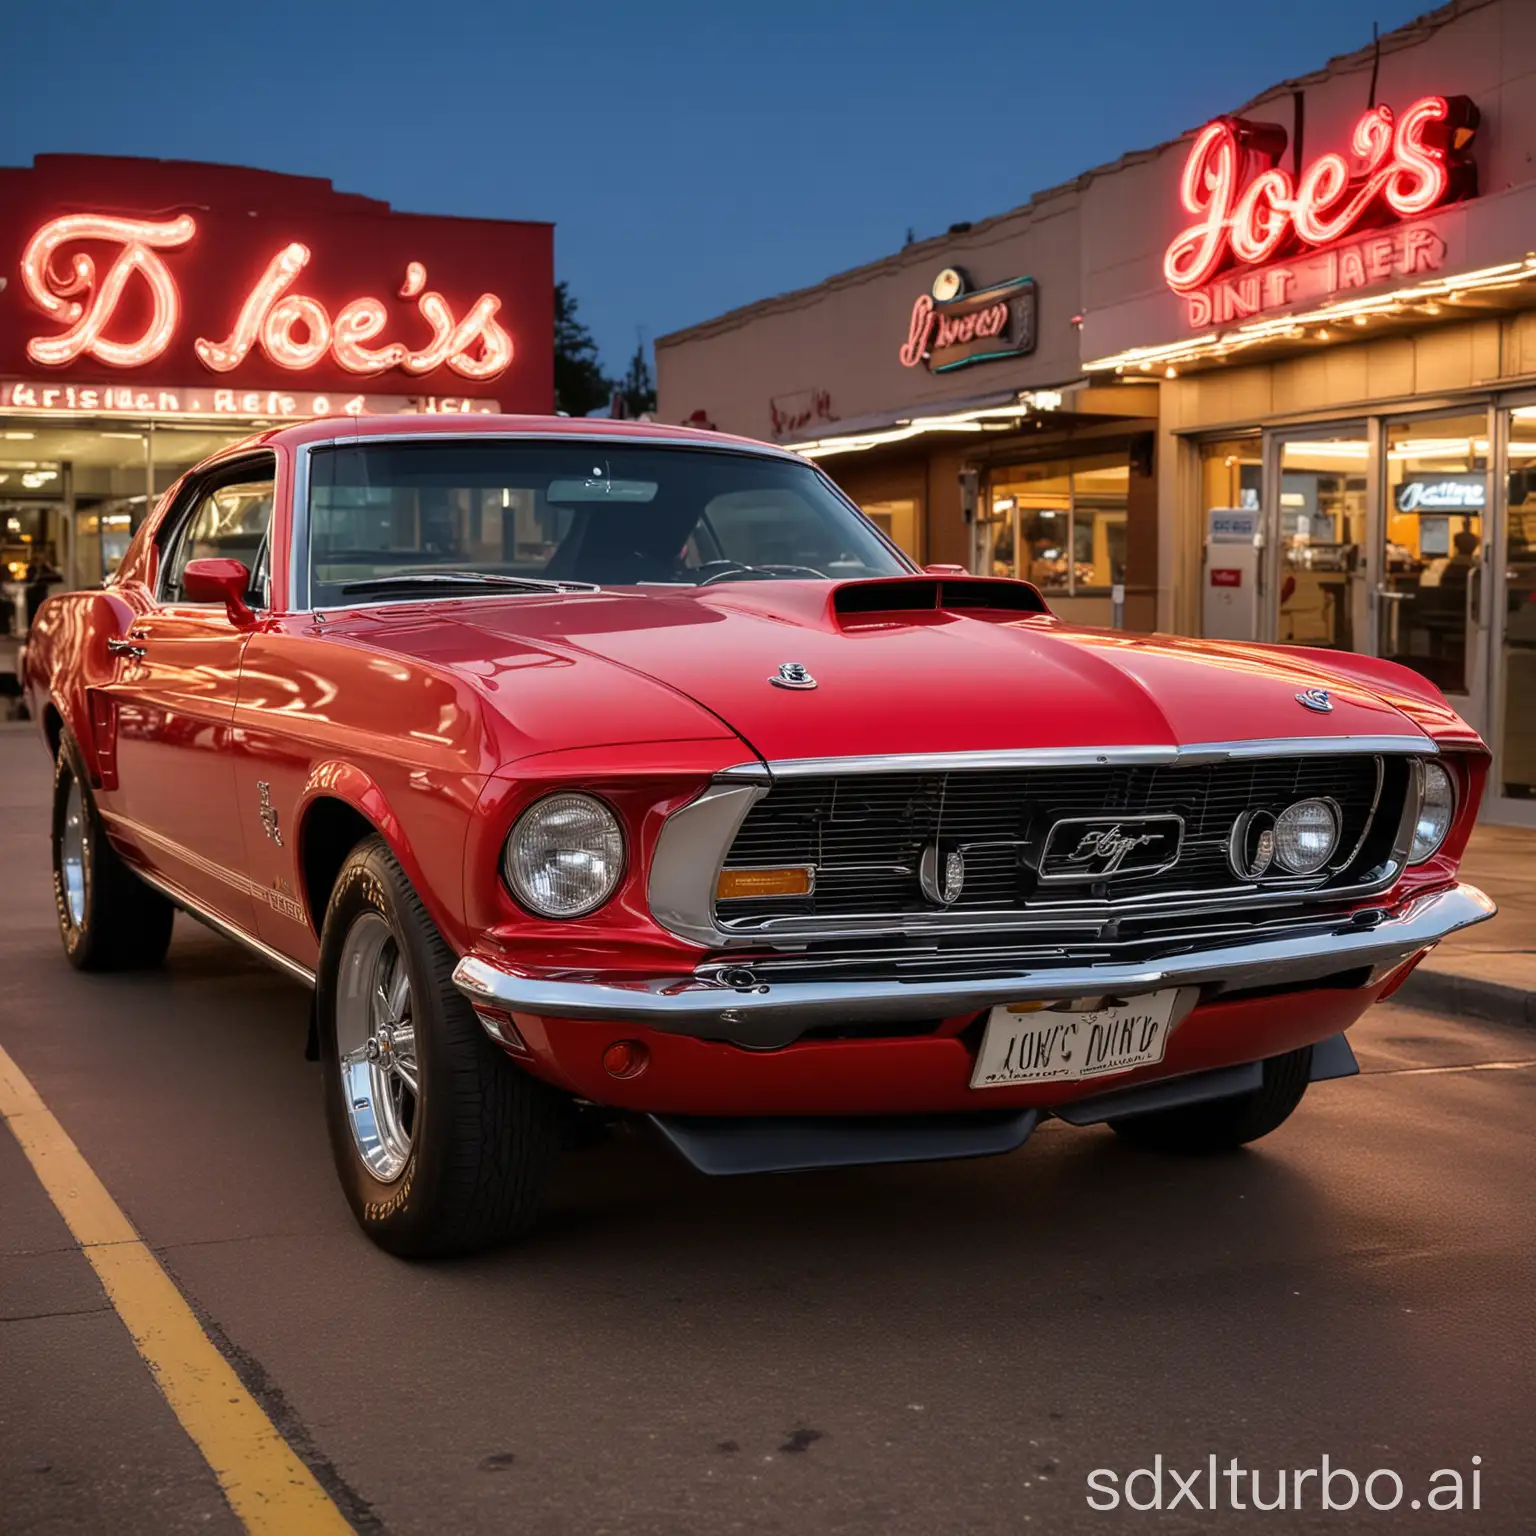 “A close-up of a red 1969 Ford Mustang's grille and headlights, with the car parked in front of a classic American diner. The diner's neon sign reads "Joe's Diner - Established 1954